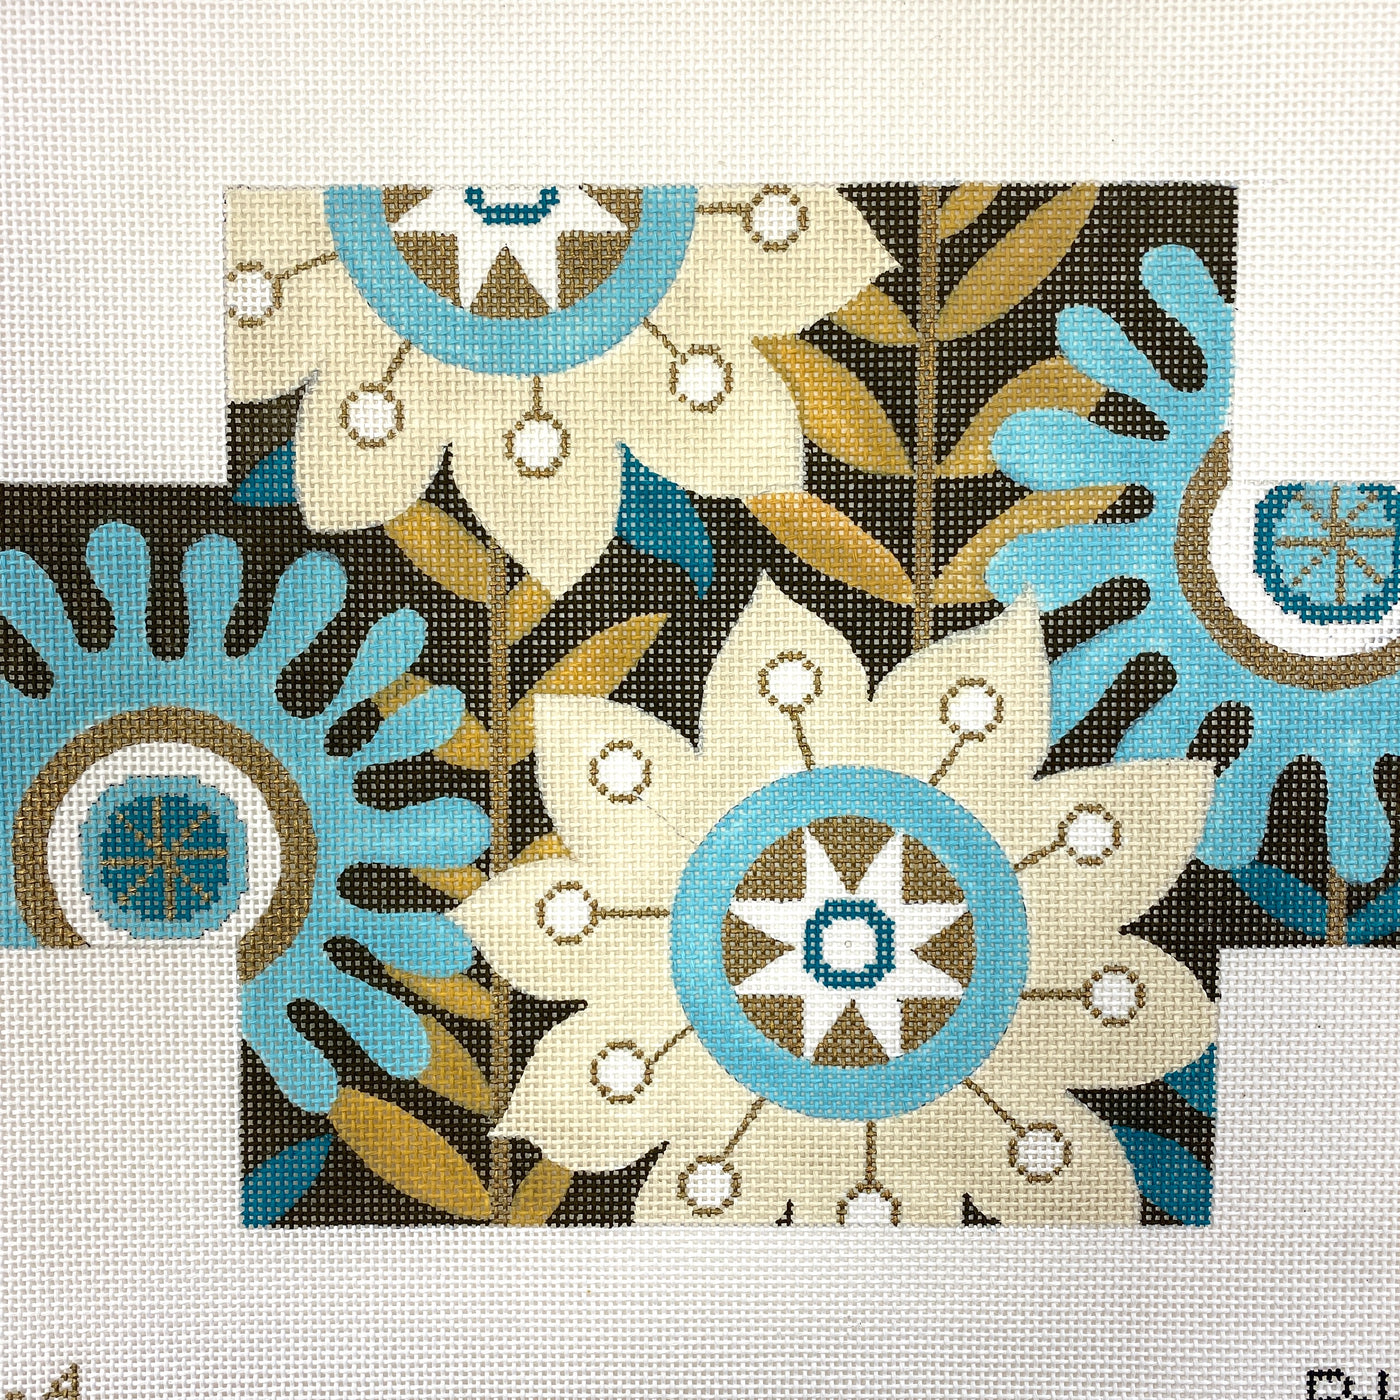 Aqua and Gold Floral Brick Cover Needlepoint Canvas